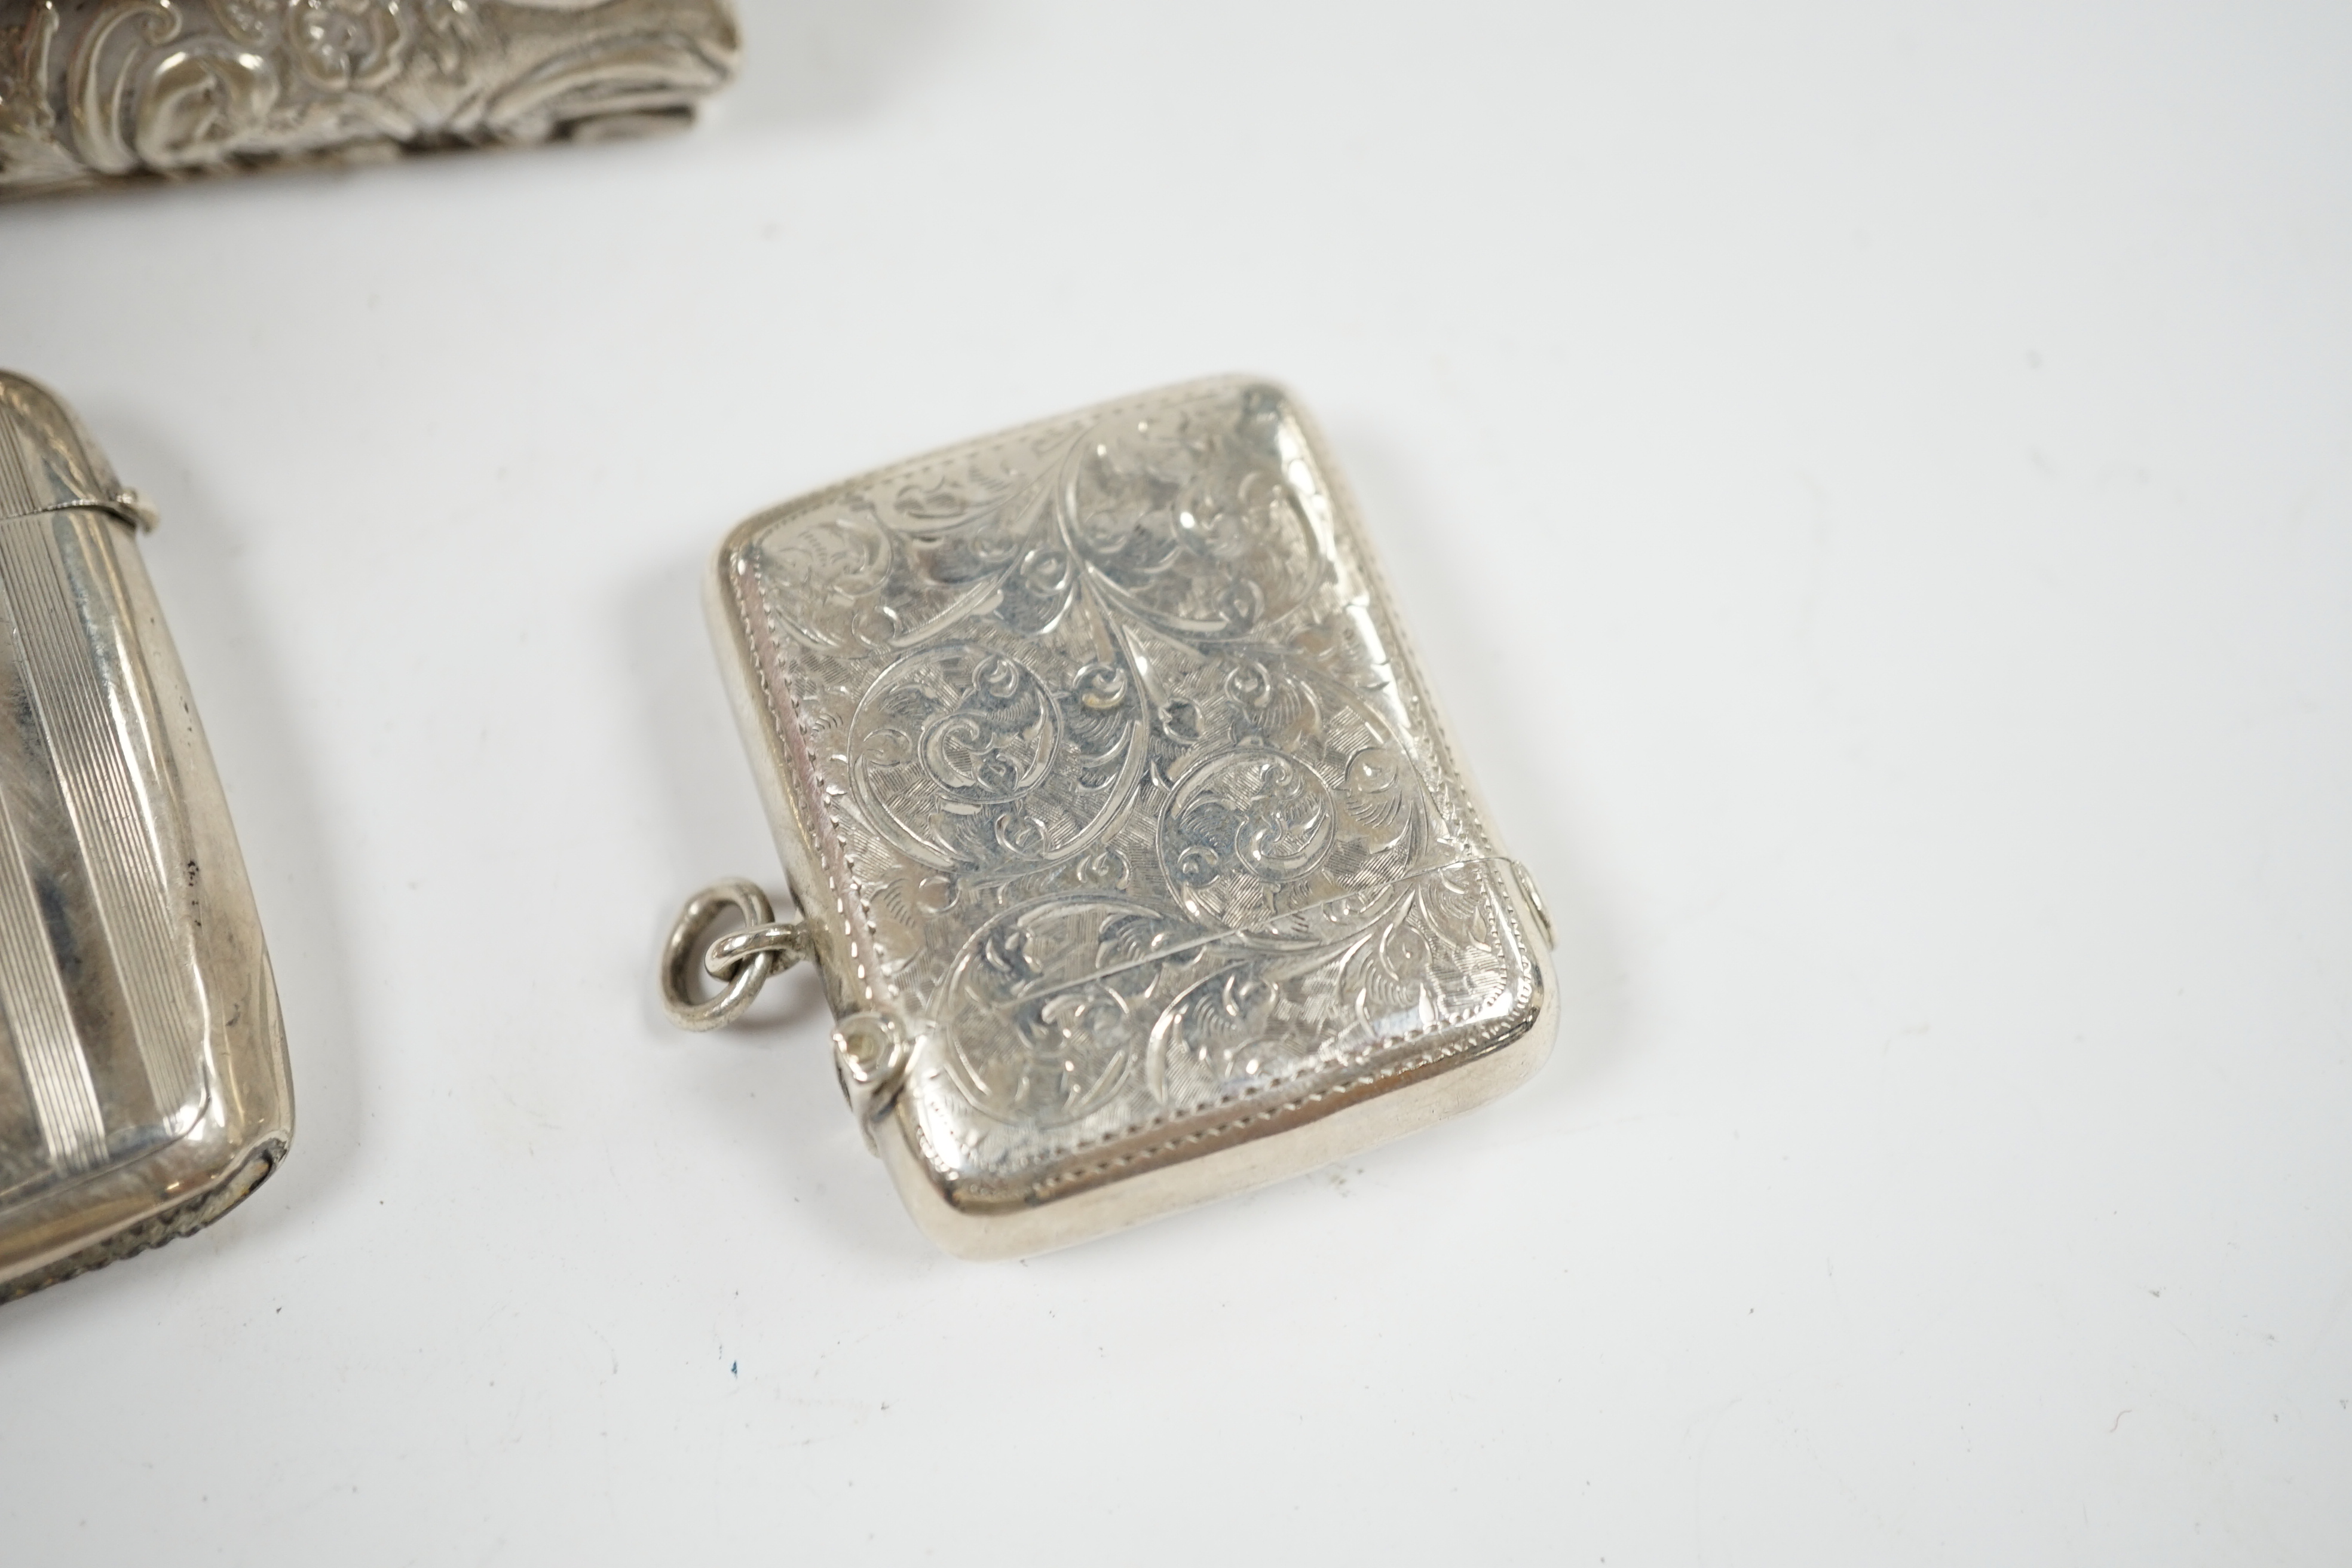 Two early 20th century silver vesta cases and an Edwardian repousse silver trinket box, 11cm. Condition - fair